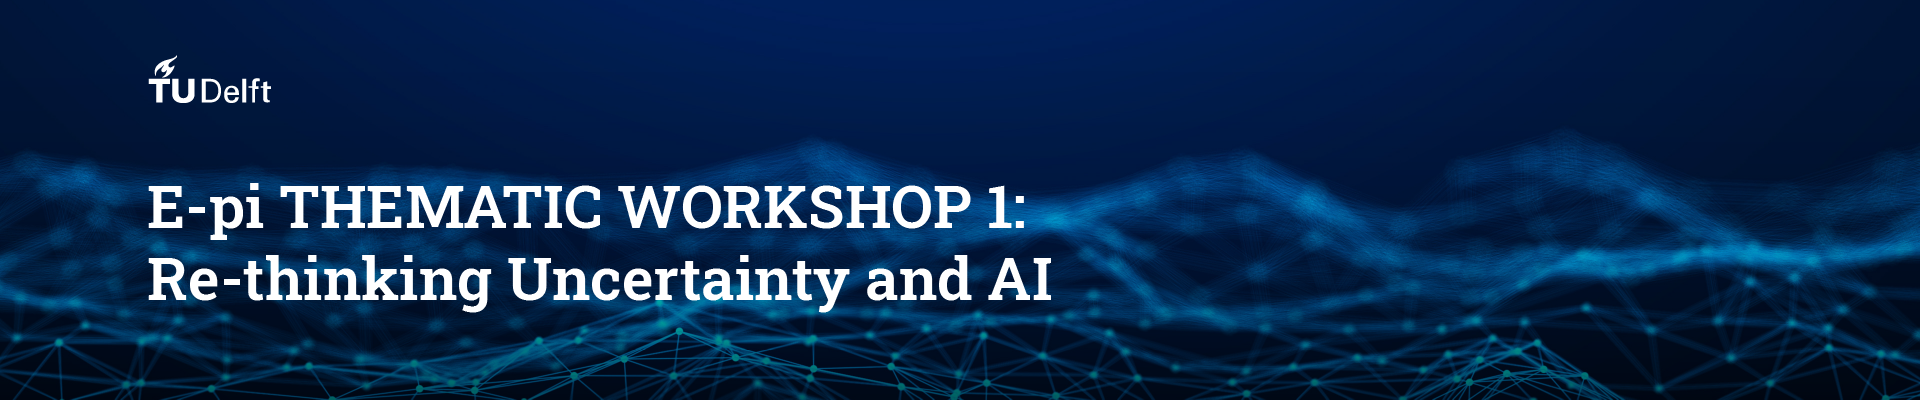 E-pi THEMATIC WORKSHOP 1: Re-thinking Uncertainty and AI